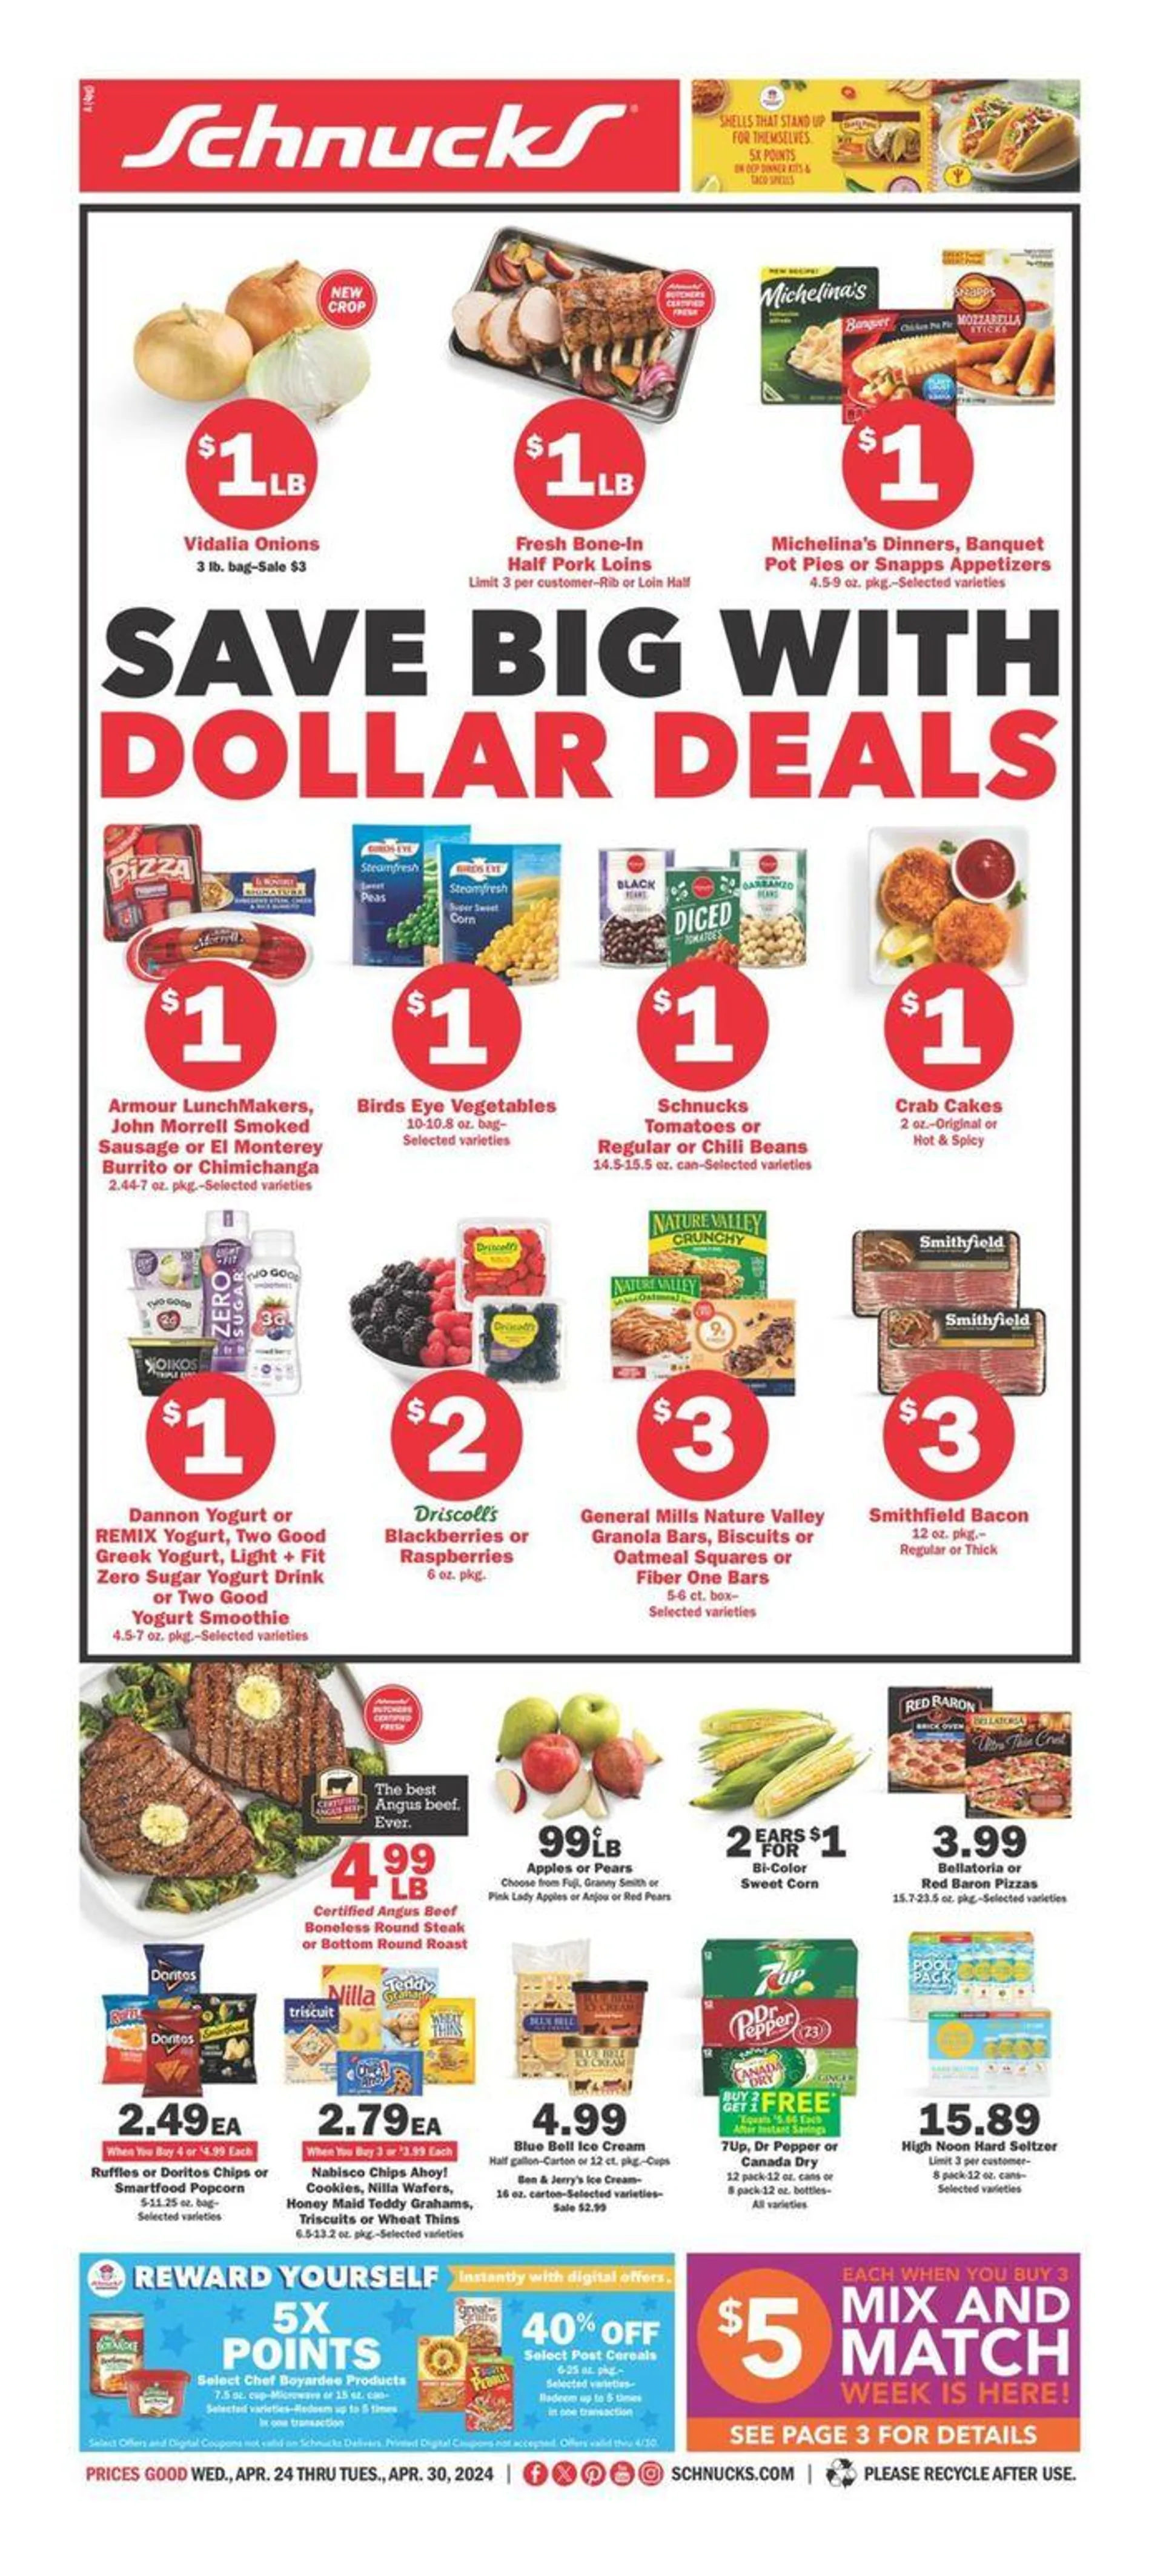 Save Big With Dollar Deals - 1